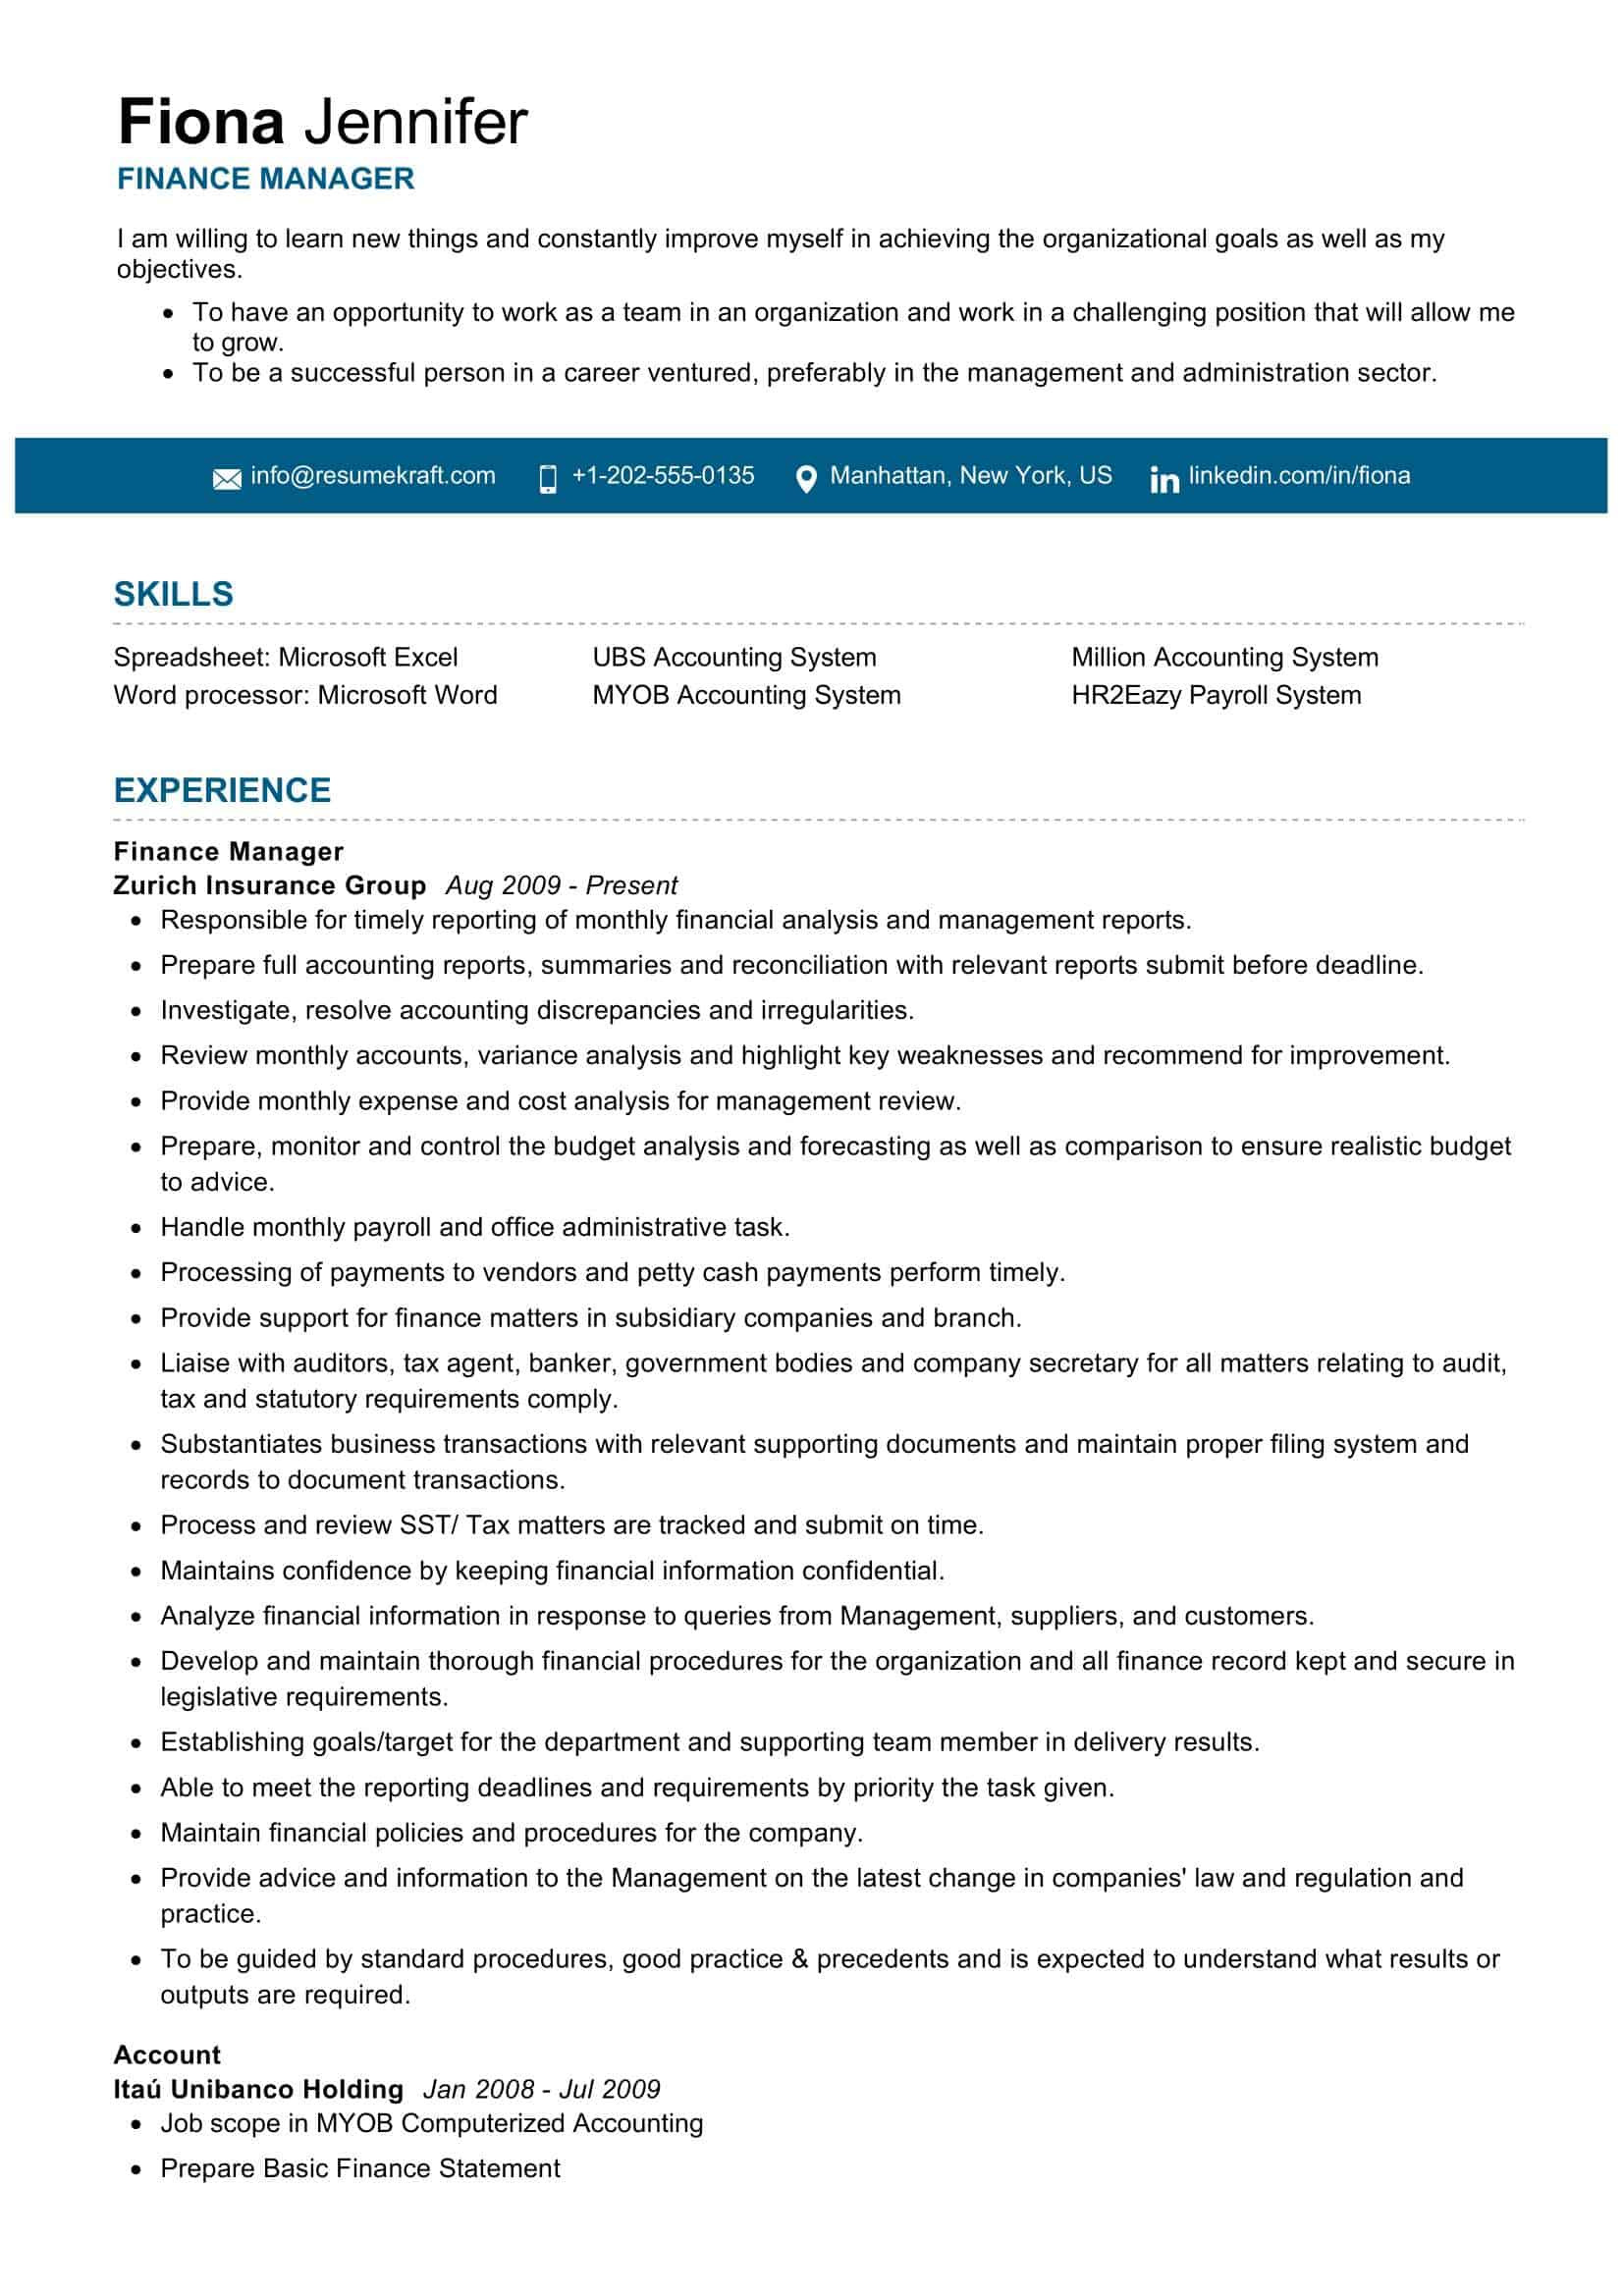 Sample Resume Of Finance Manager In India Finance Manager Resume Sample 2022 Writing Tips – Resumekraft